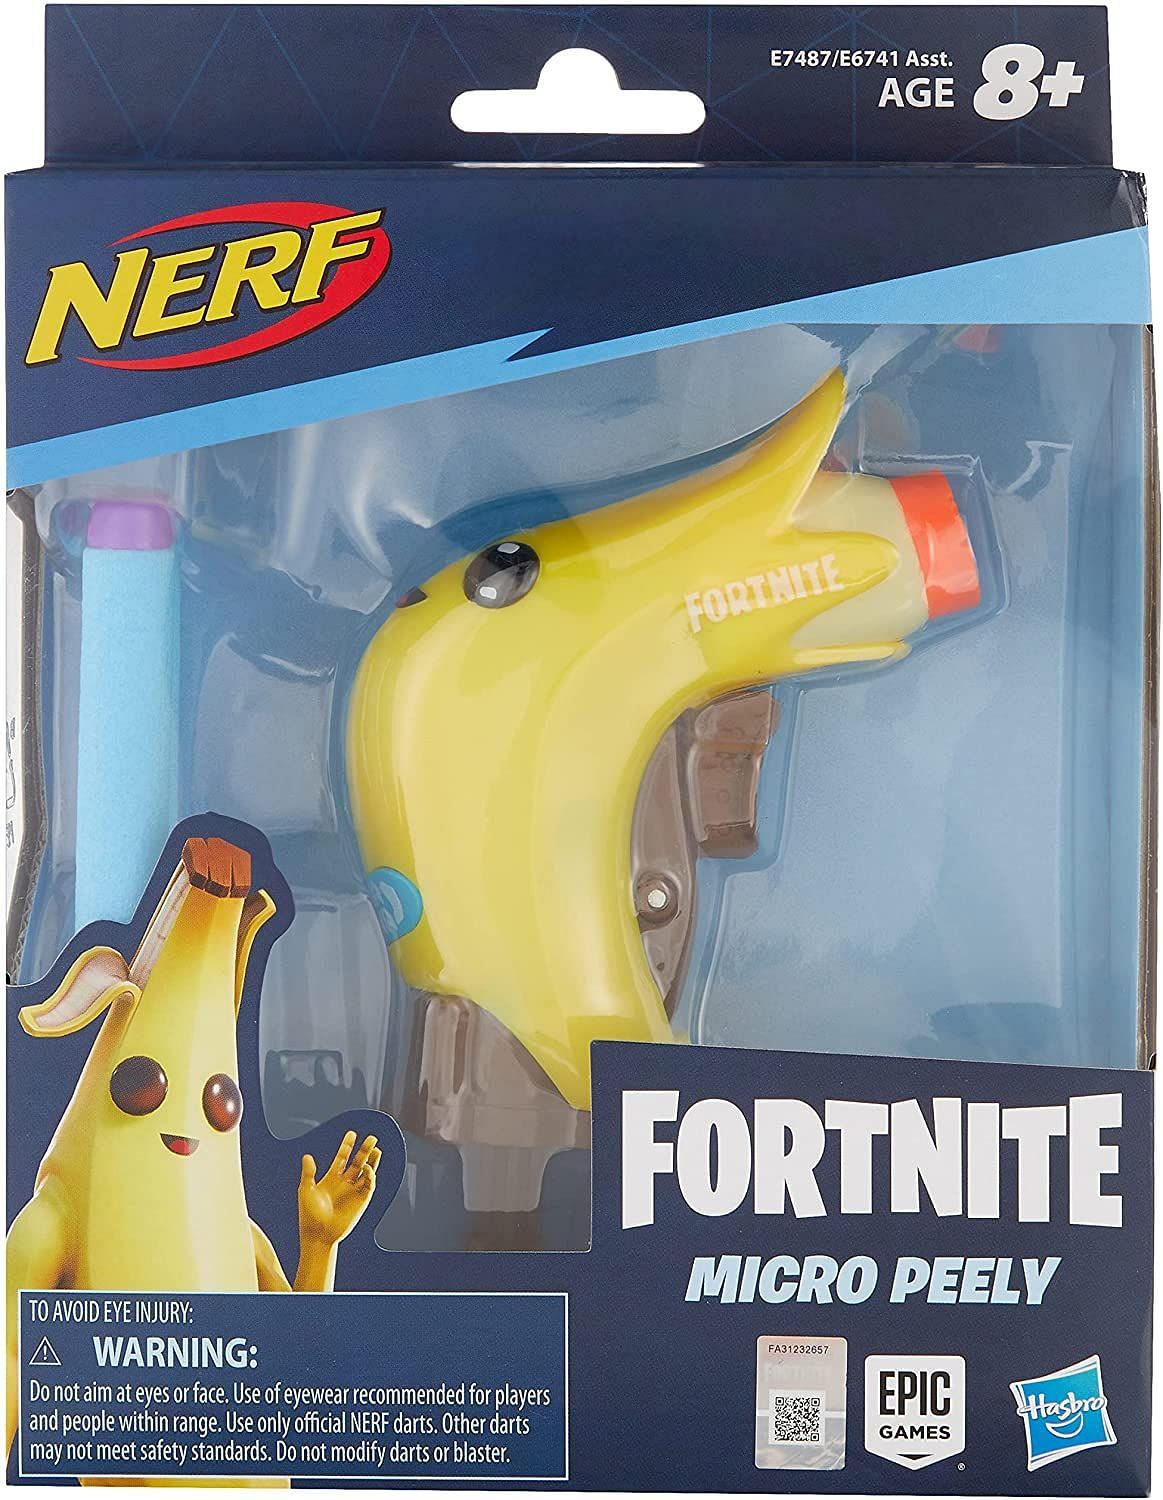 Micro Peely is a fun little blaster to use (Image via Epic Games/Nerf)